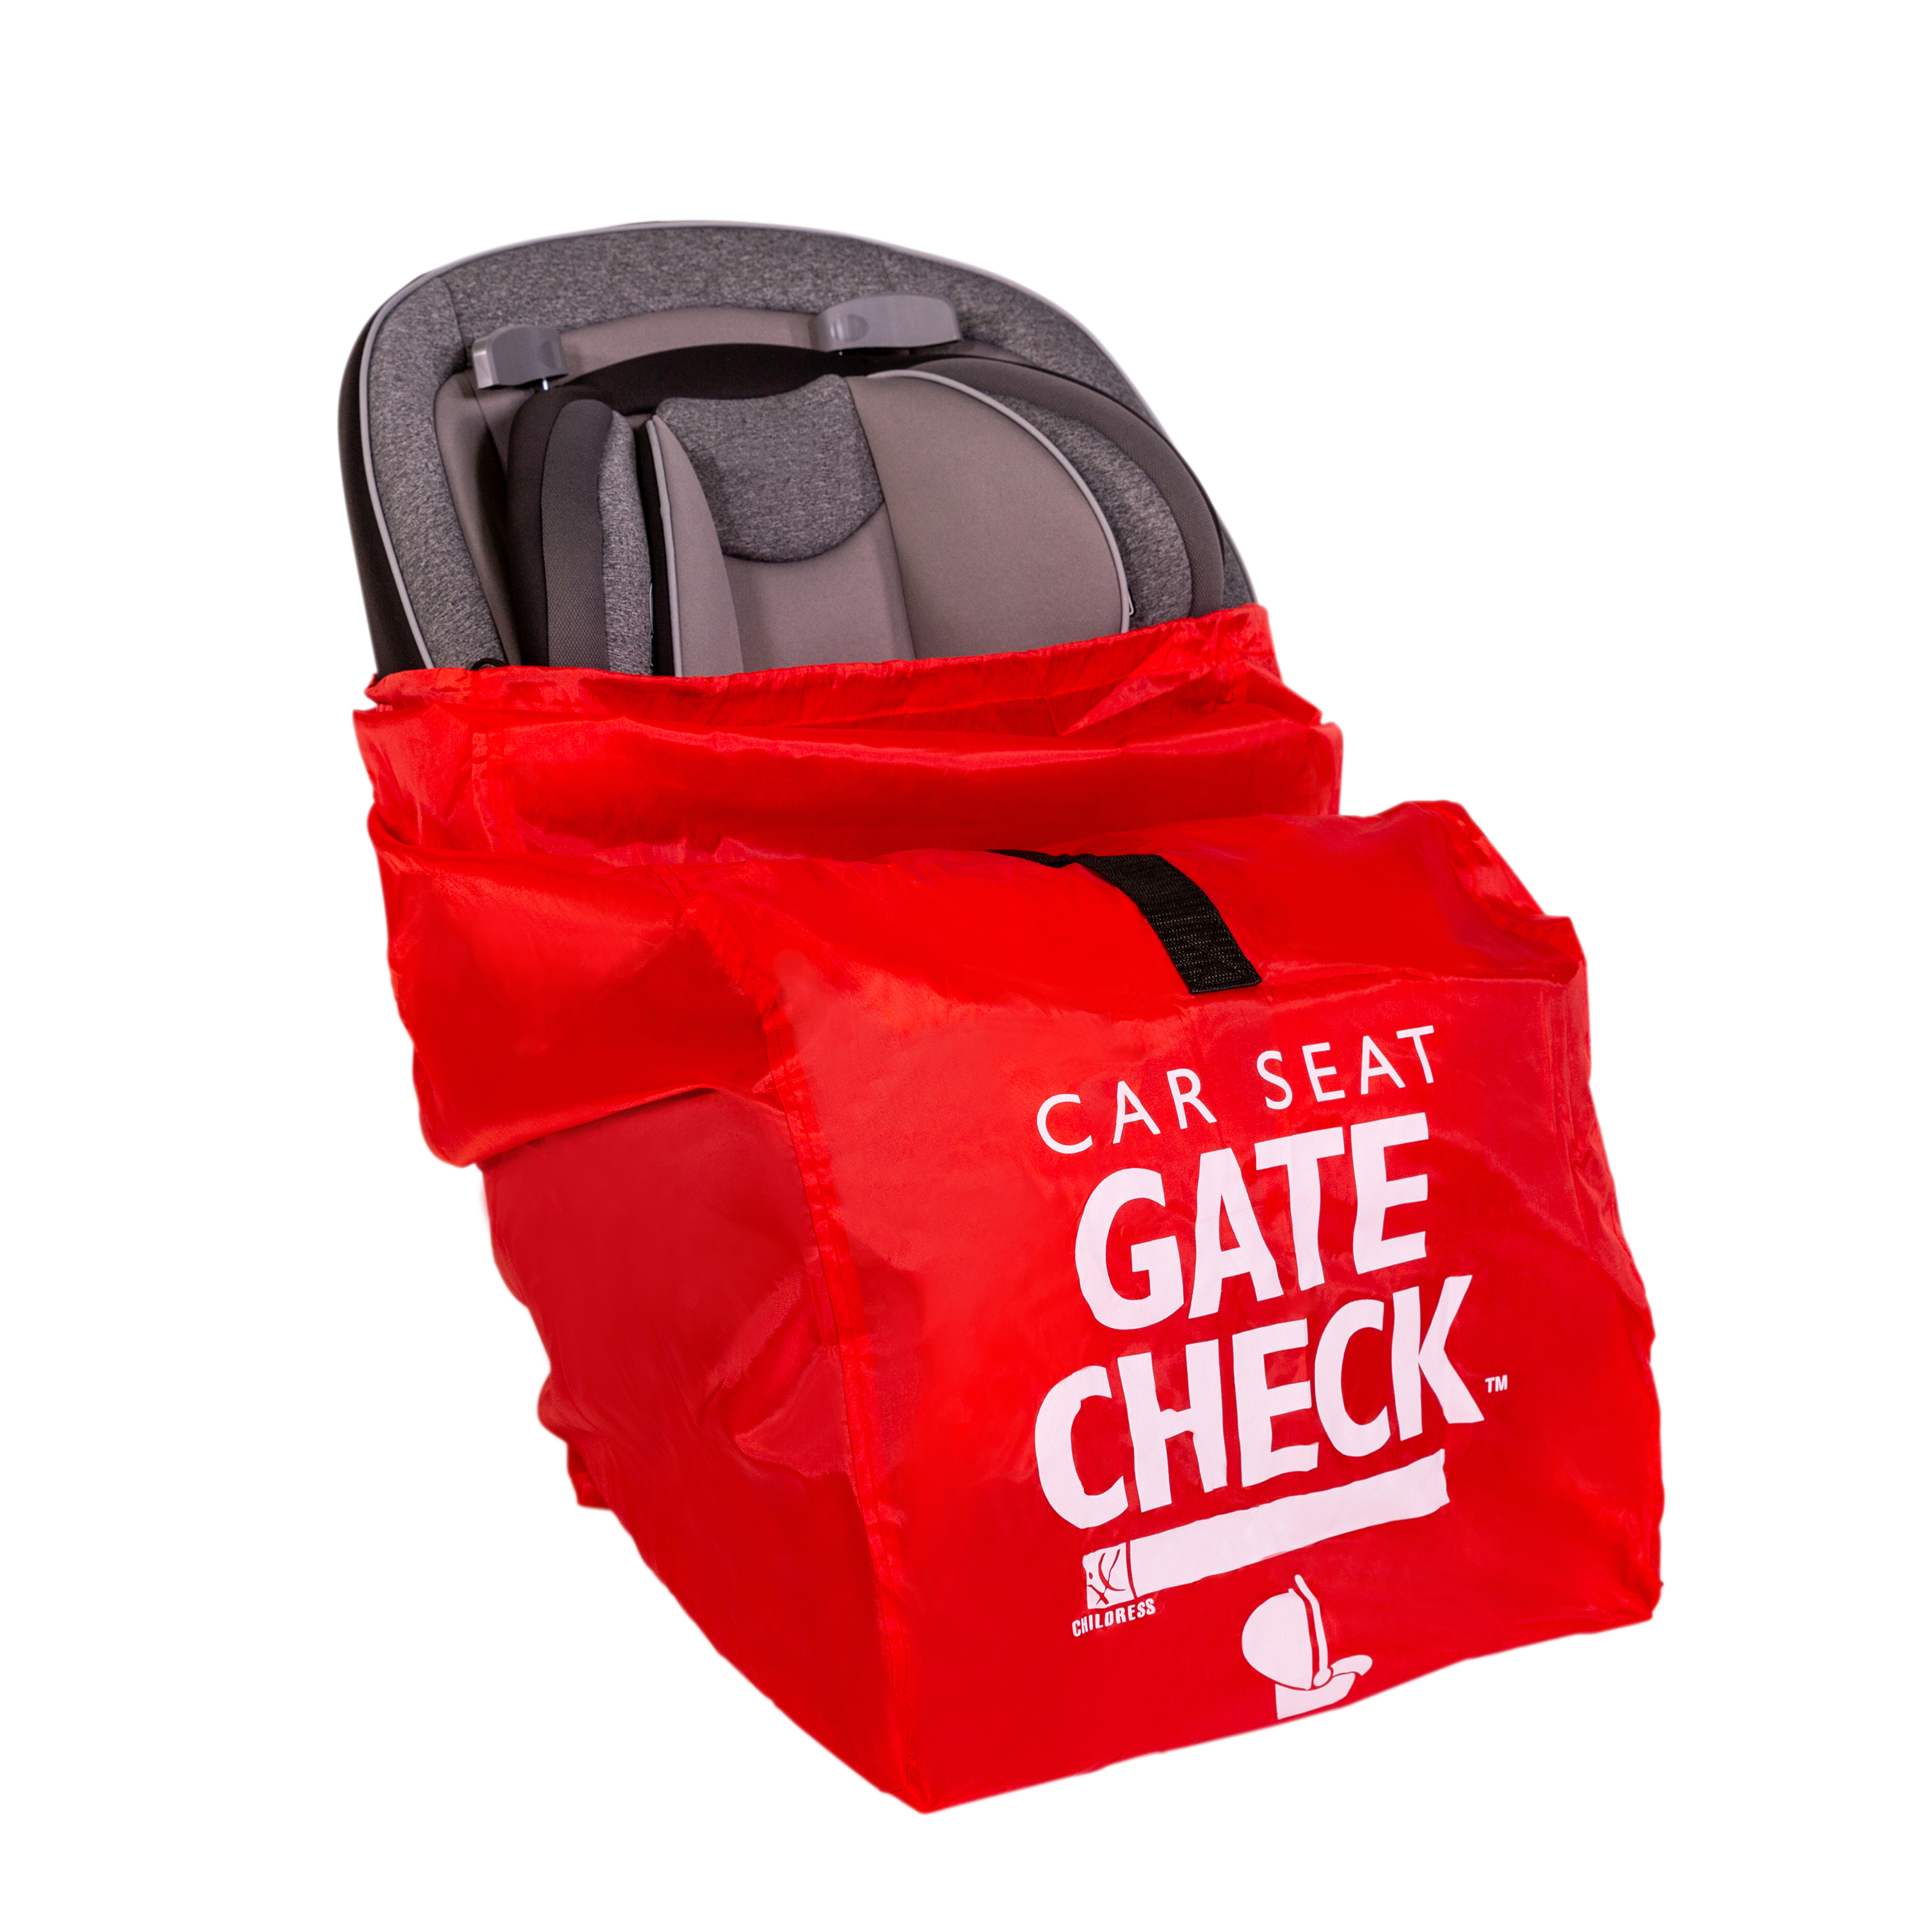 J.L. Childress Gate Check Travel Bag for Car Seats, Red - image 3 of 10